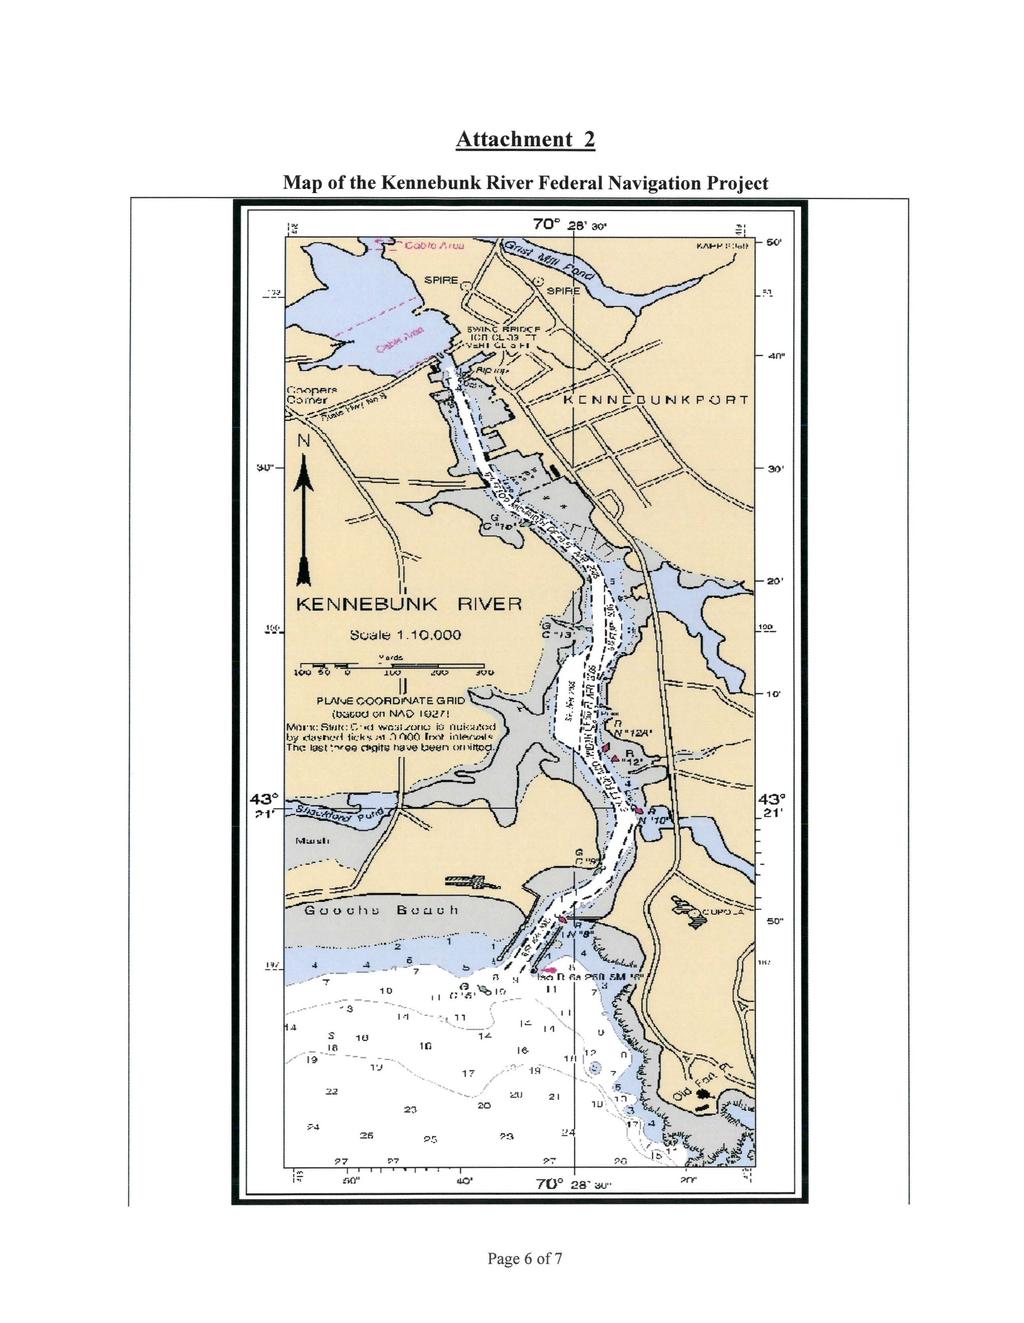 Attachment 2 Map of the Kennebunk River Federal Navigation Project 70.26' 30' ;;:: :t..! ~ SQ' :;!.I)" 20' I """"!il-- ~vii;jle 1.